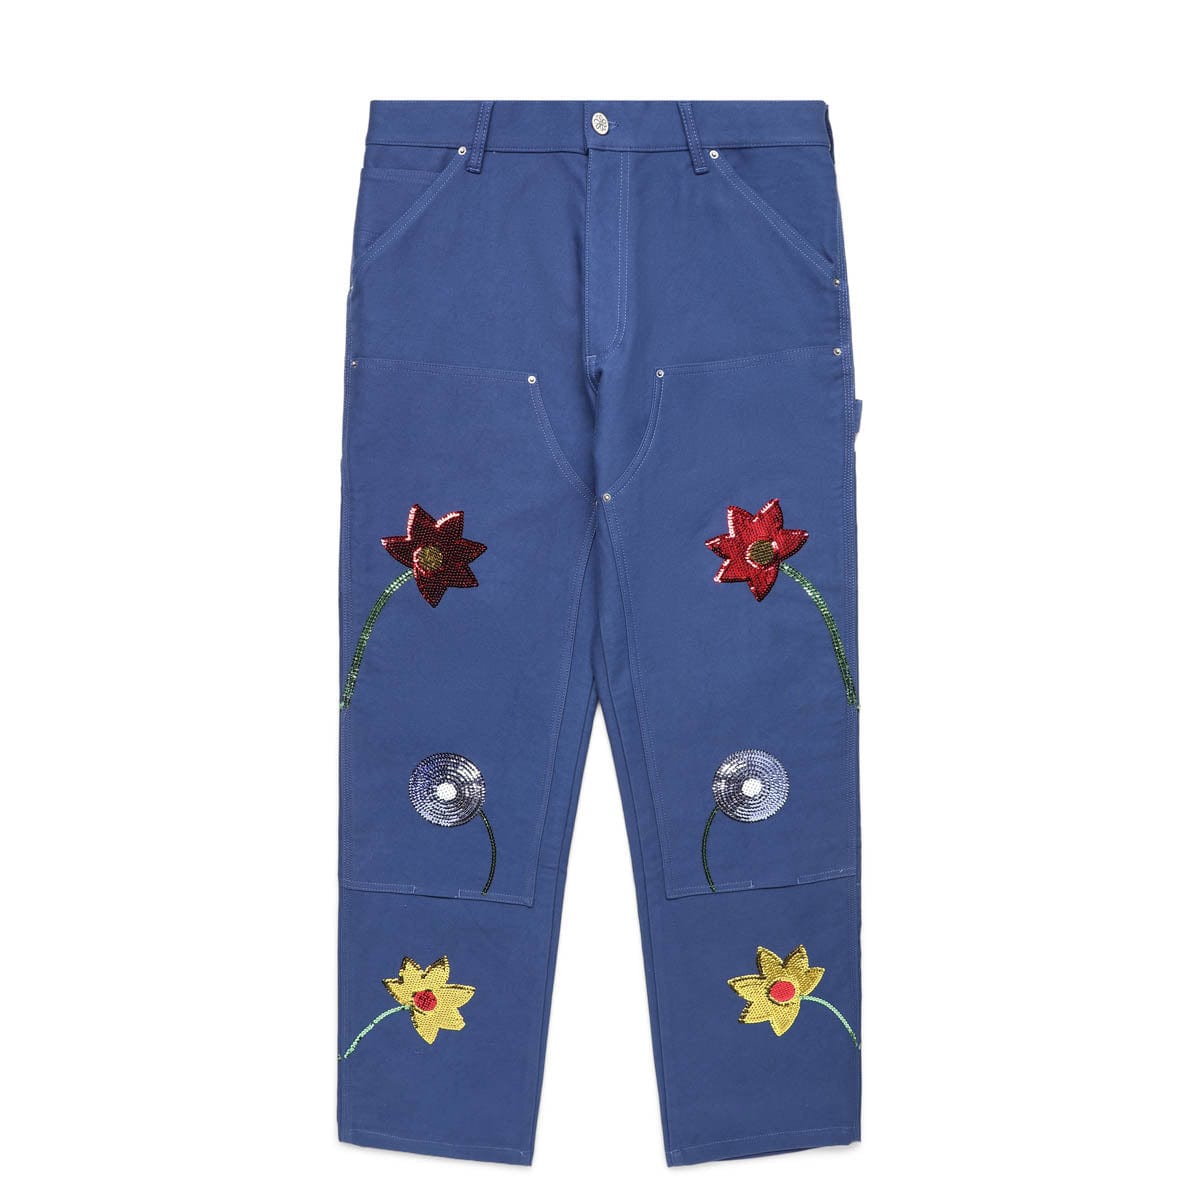 Sky High Farm Workwear Bottoms FLORAL EMBROIDERED DOUBLE KNEE PANTS